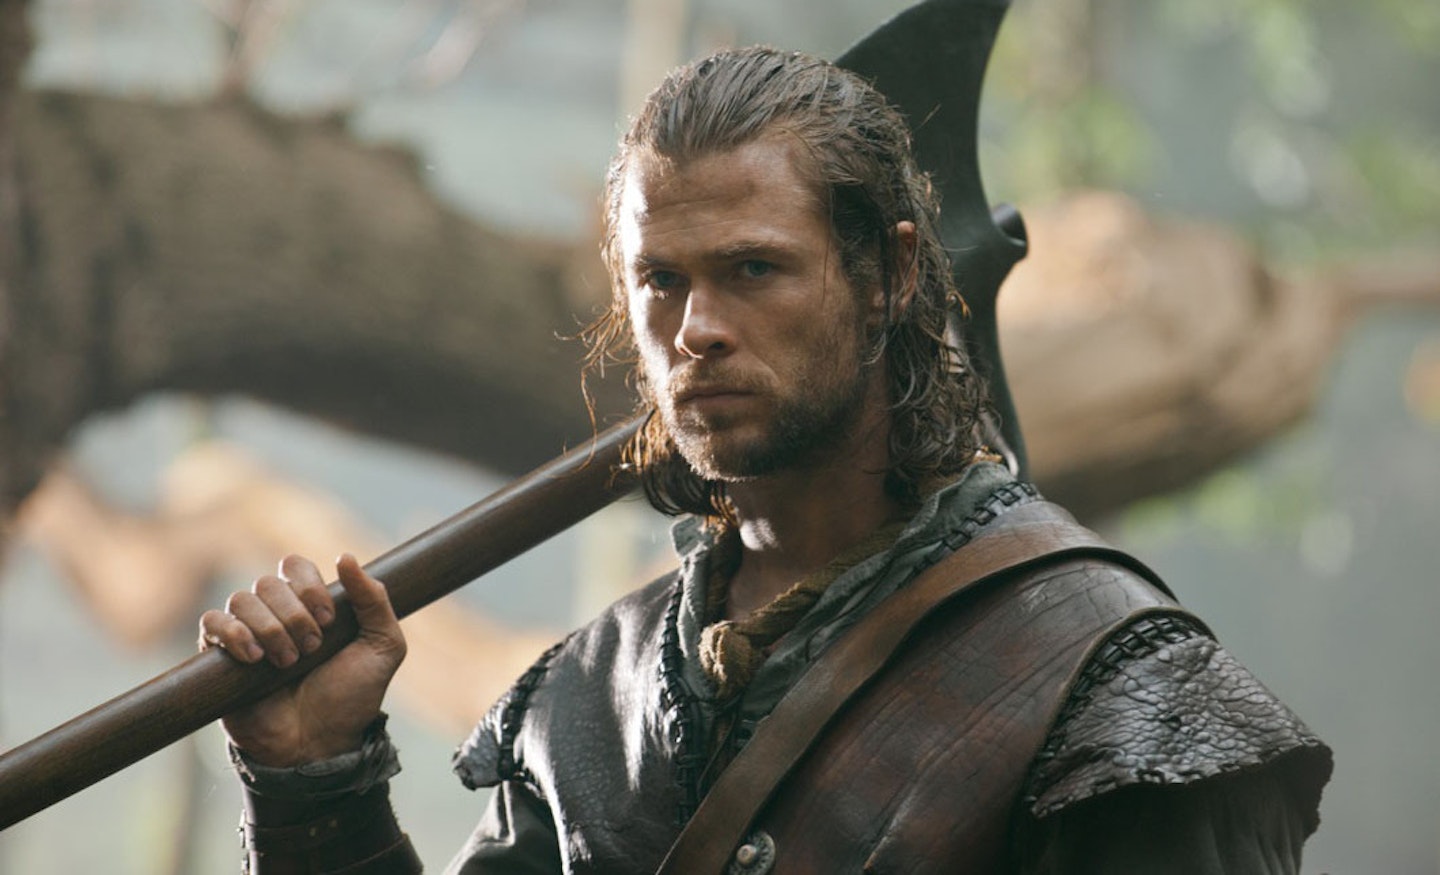 Chris Hemsworth in Snow White and the Huntsman